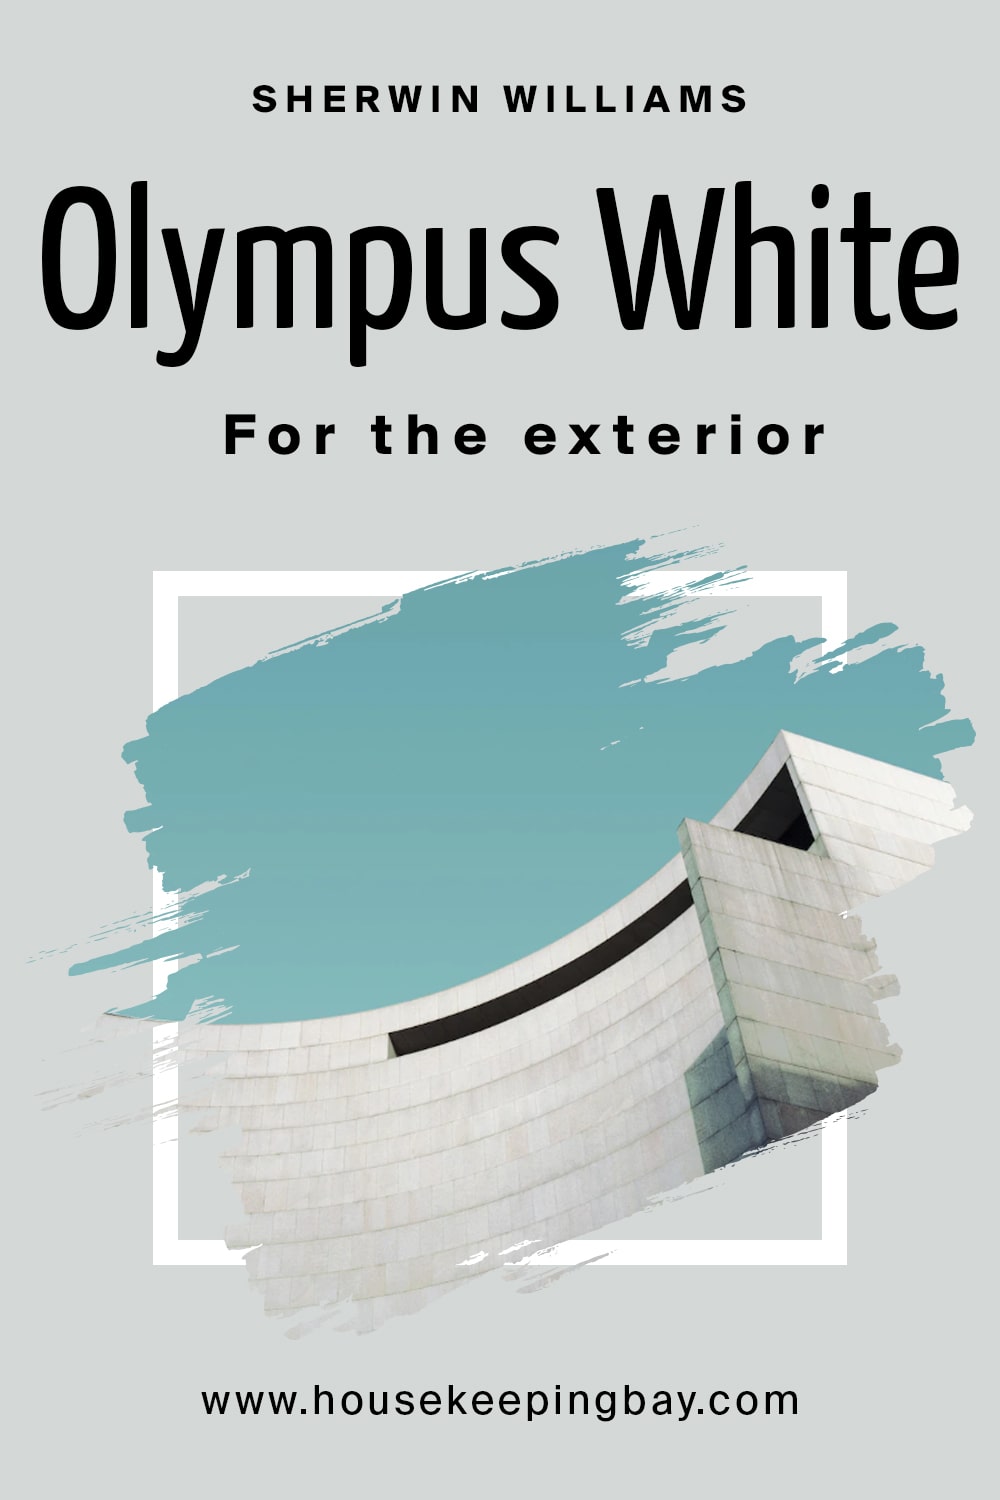 Sherwin Williams. Olympus White For the exterior